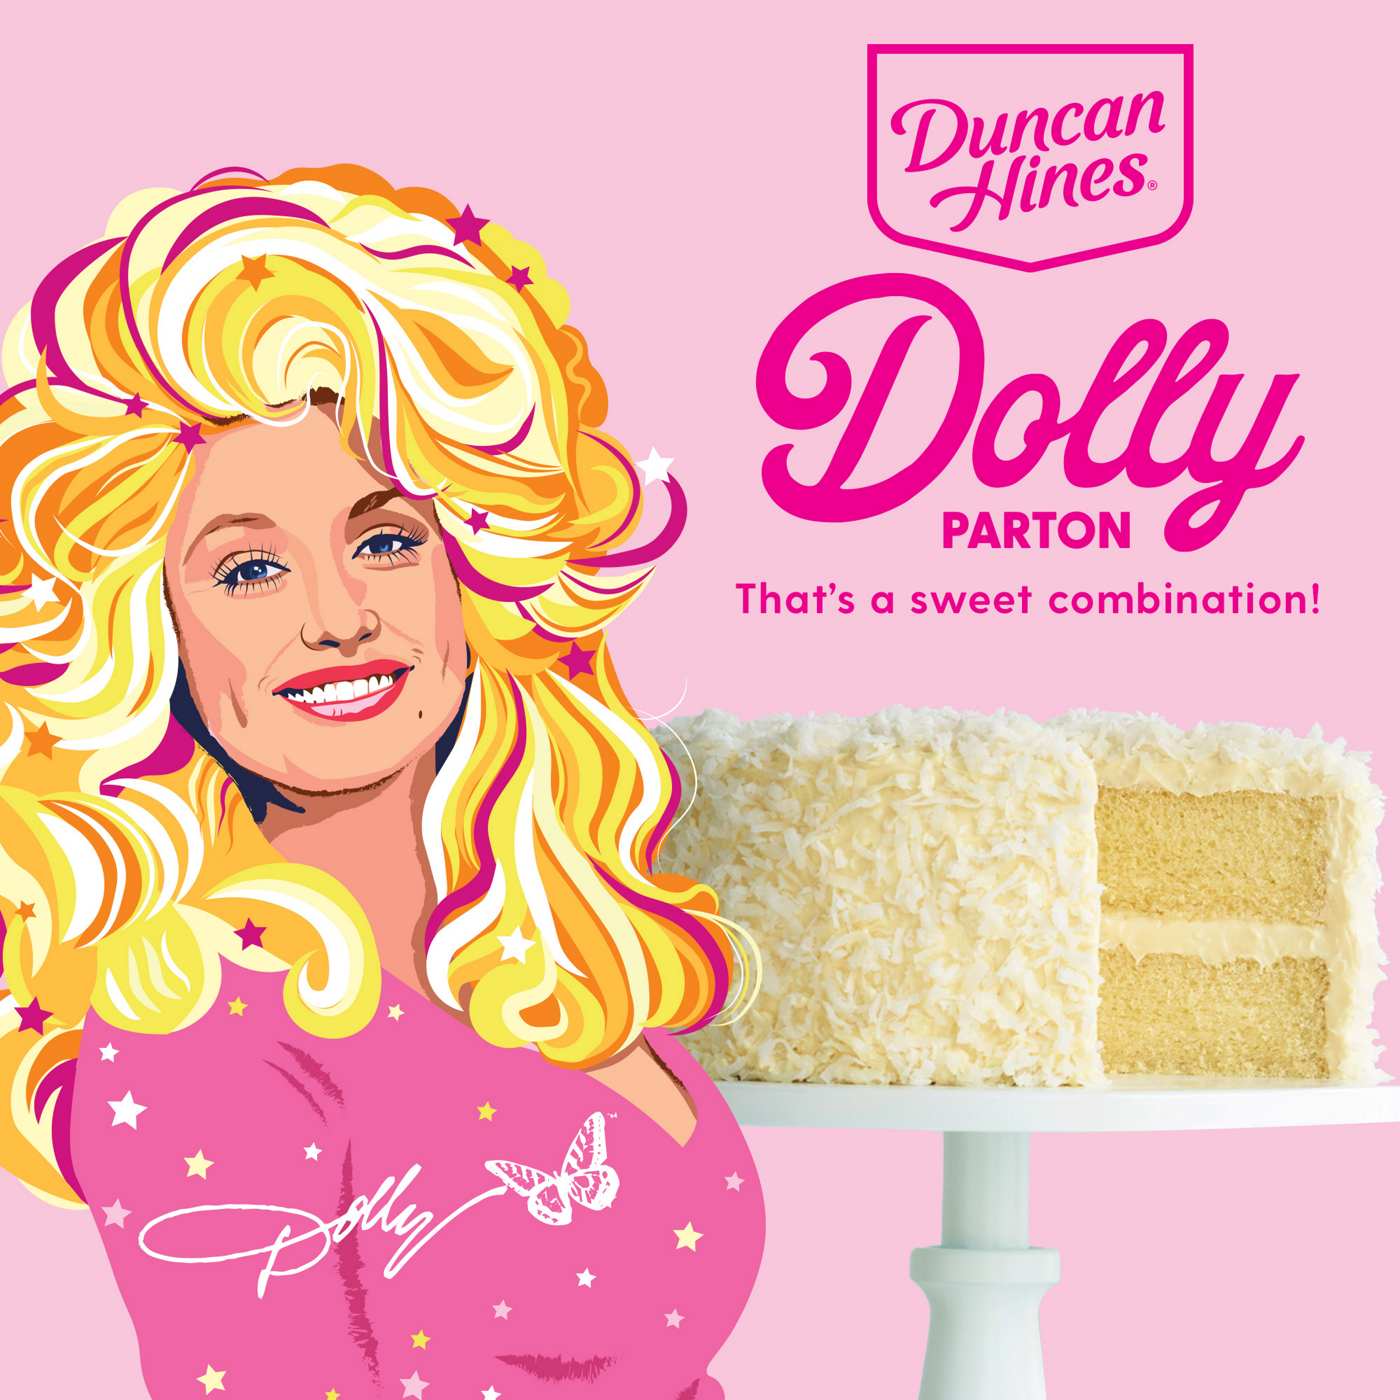 Duncan Hines Dolly Parton's Favorite Creamy Buttercream Flavored Cake Frosting; image 4 of 7